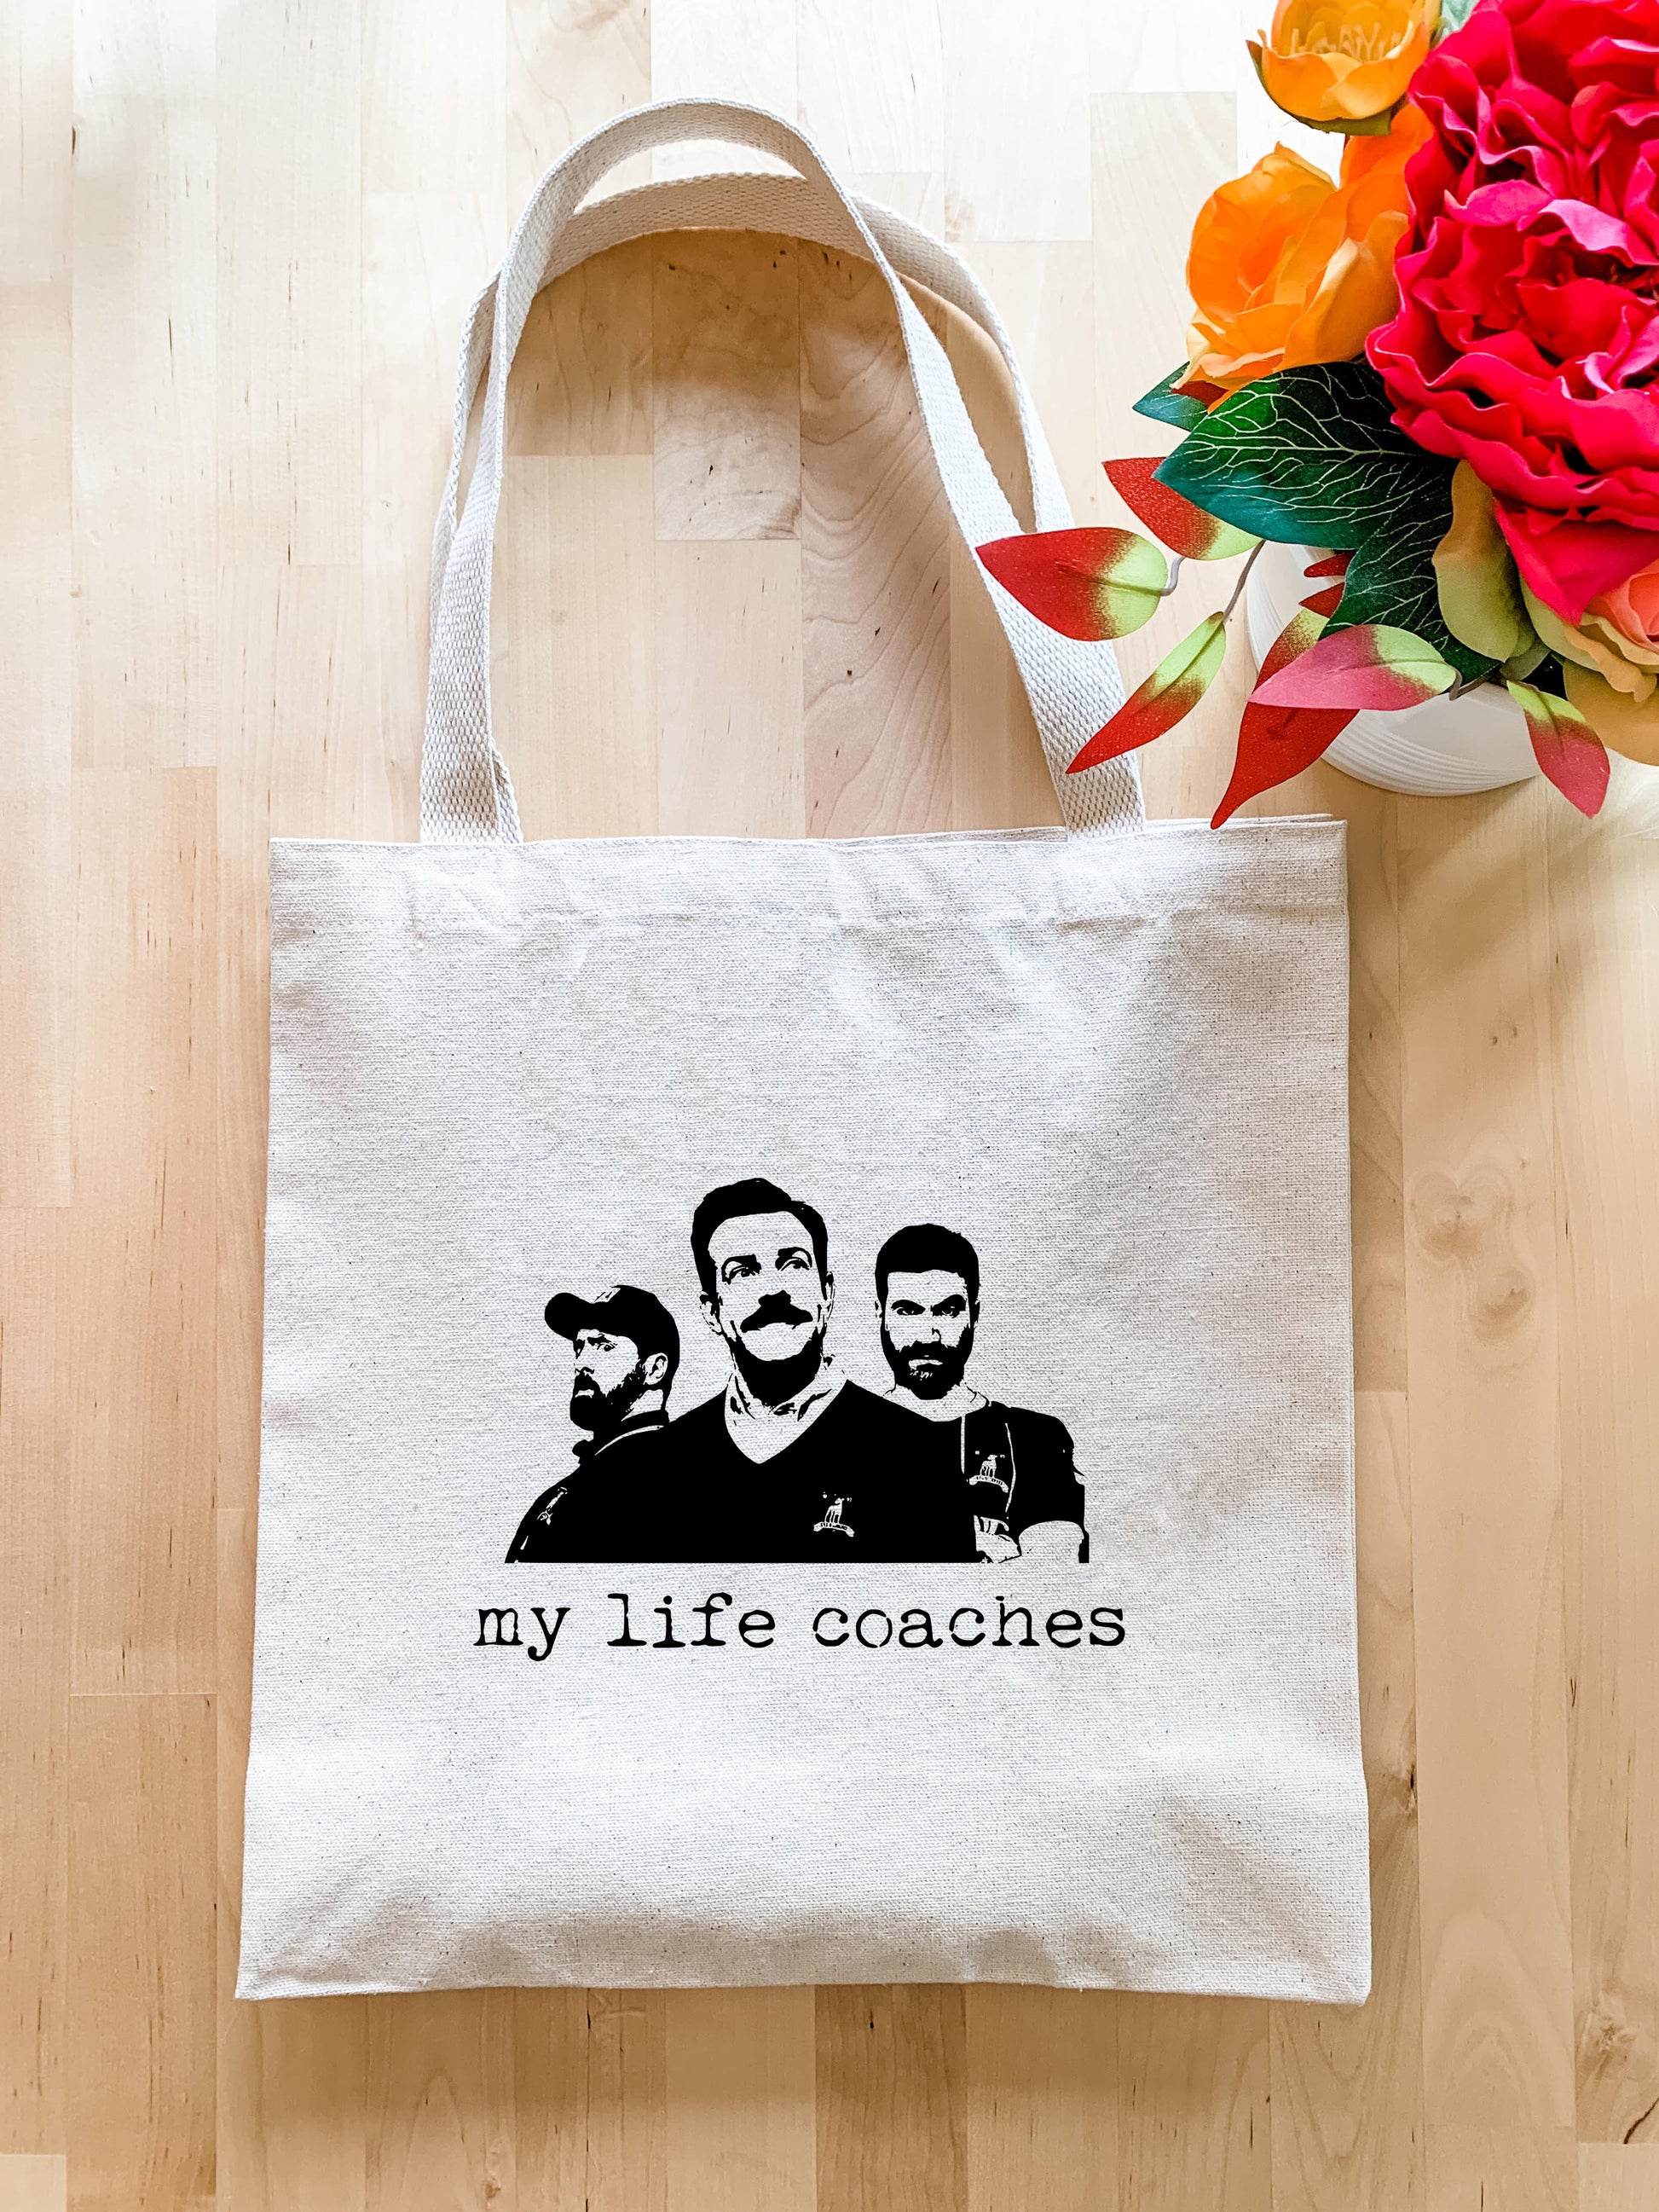 My Life Coaches (Ted Lasso) - Tote Bag - MoonlightMakers